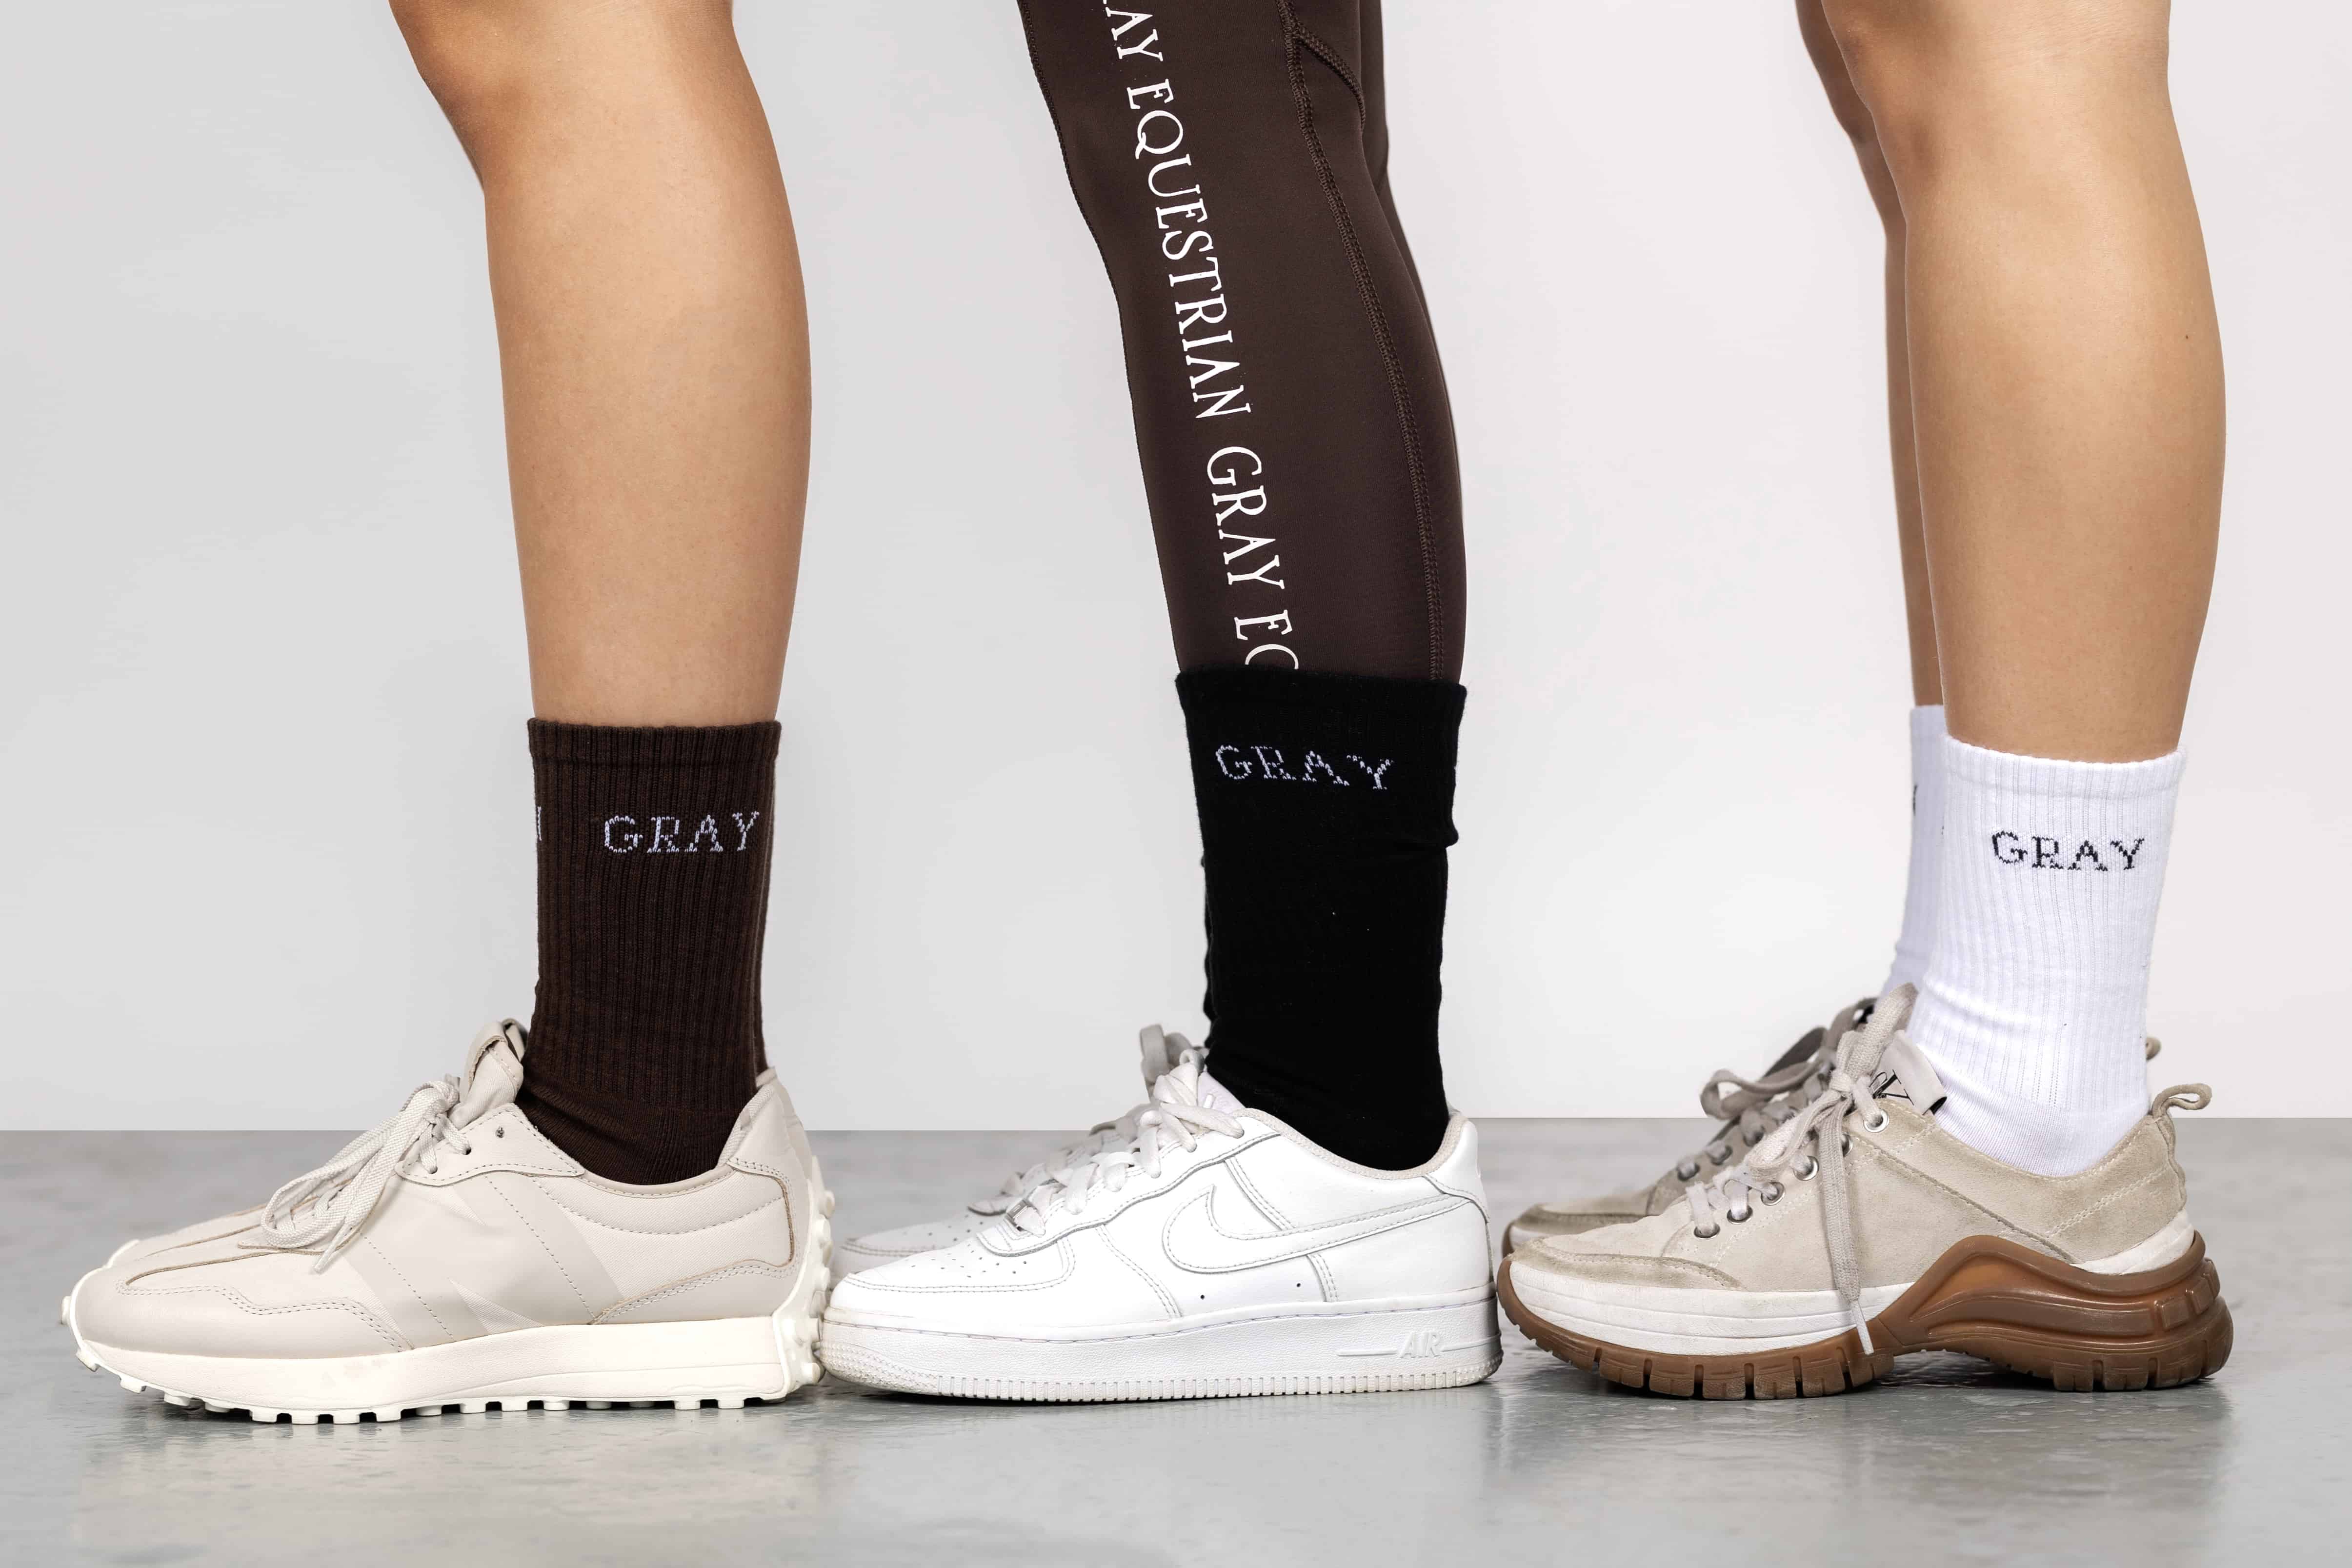 Three models wearing our brown, black and white renew socks.